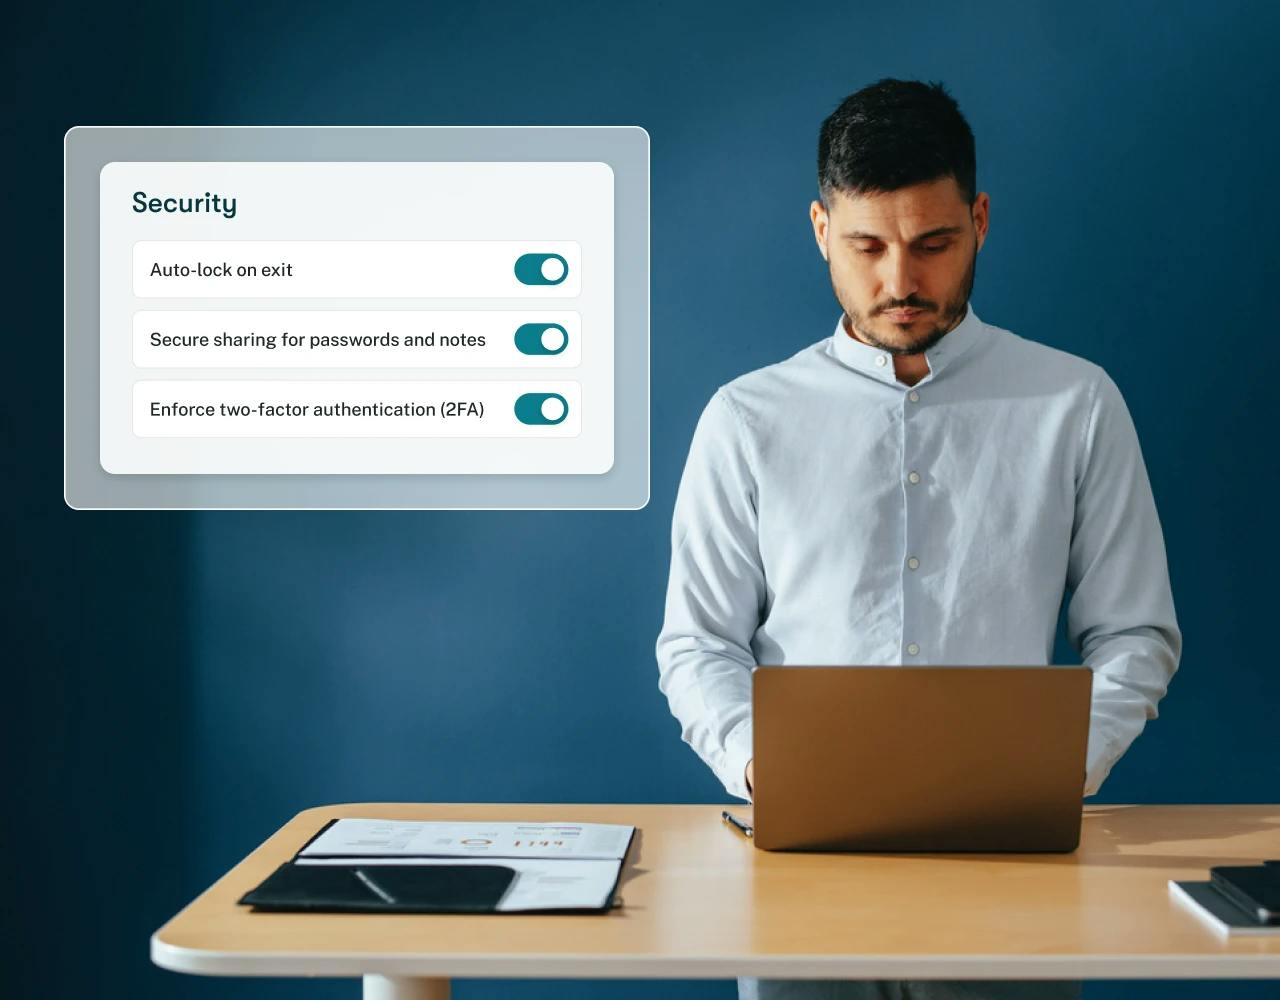 This image shows an IT admin working at his desk overlaid with a product screenshot showing different security policies: Auto-lock on exit; secure password and notes sharing; and enforced 2FA.